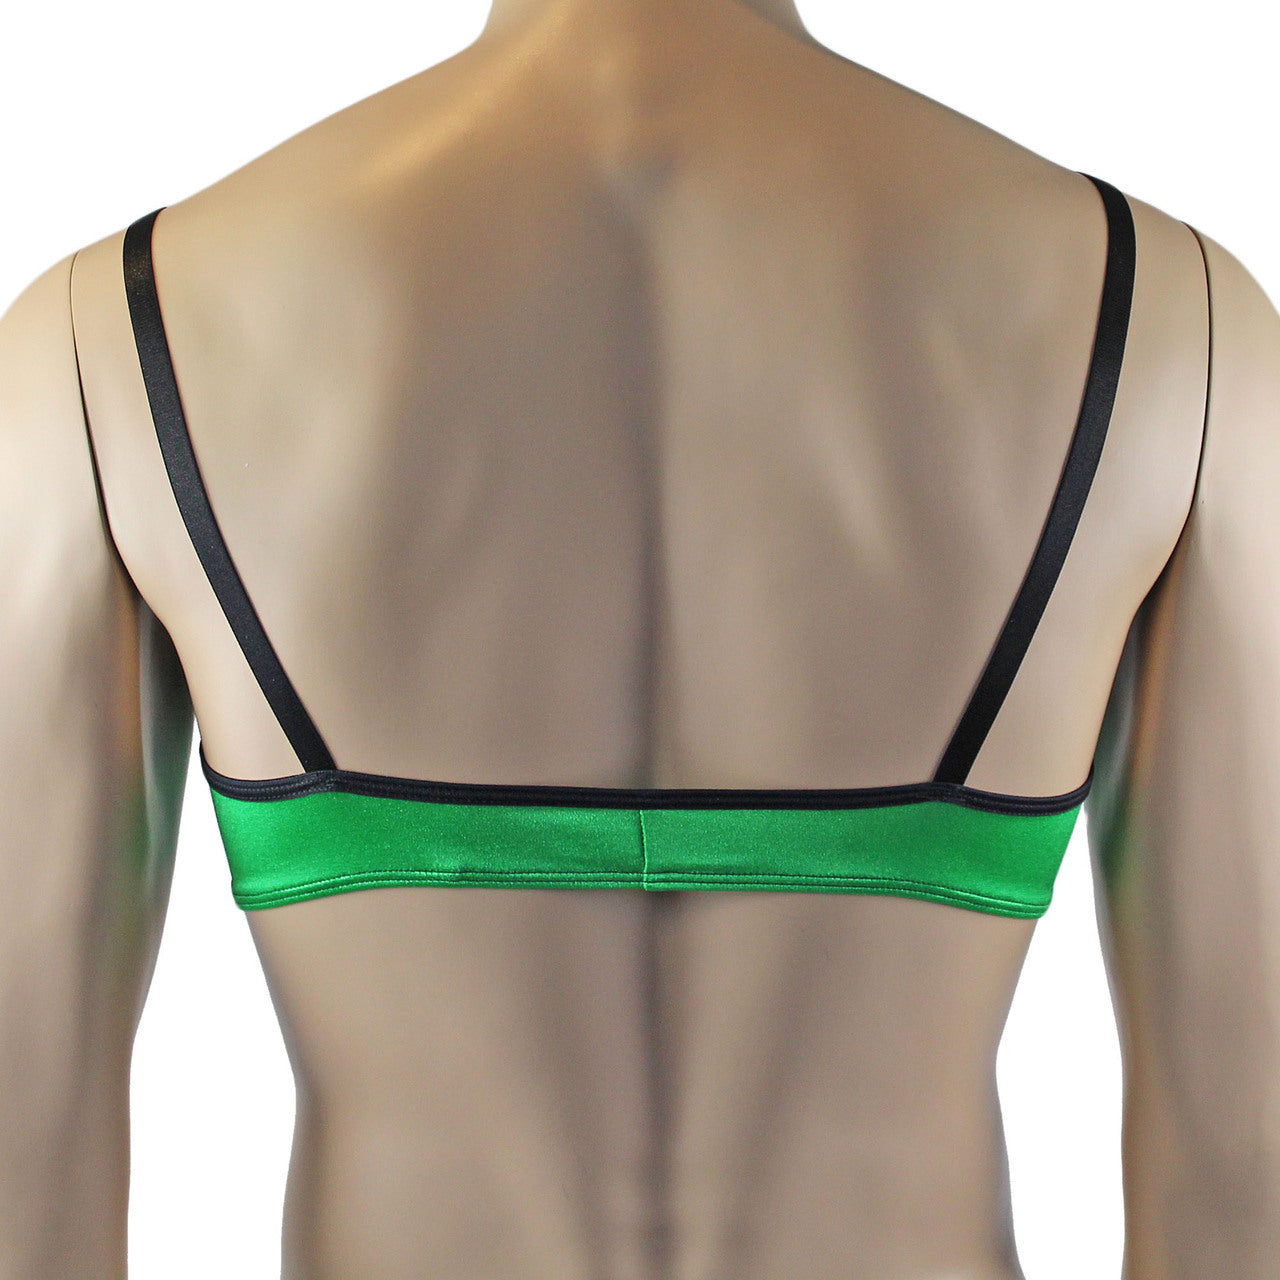 Mens Risque Bra Top and Bikini Brief (green and black plus other colours)s)